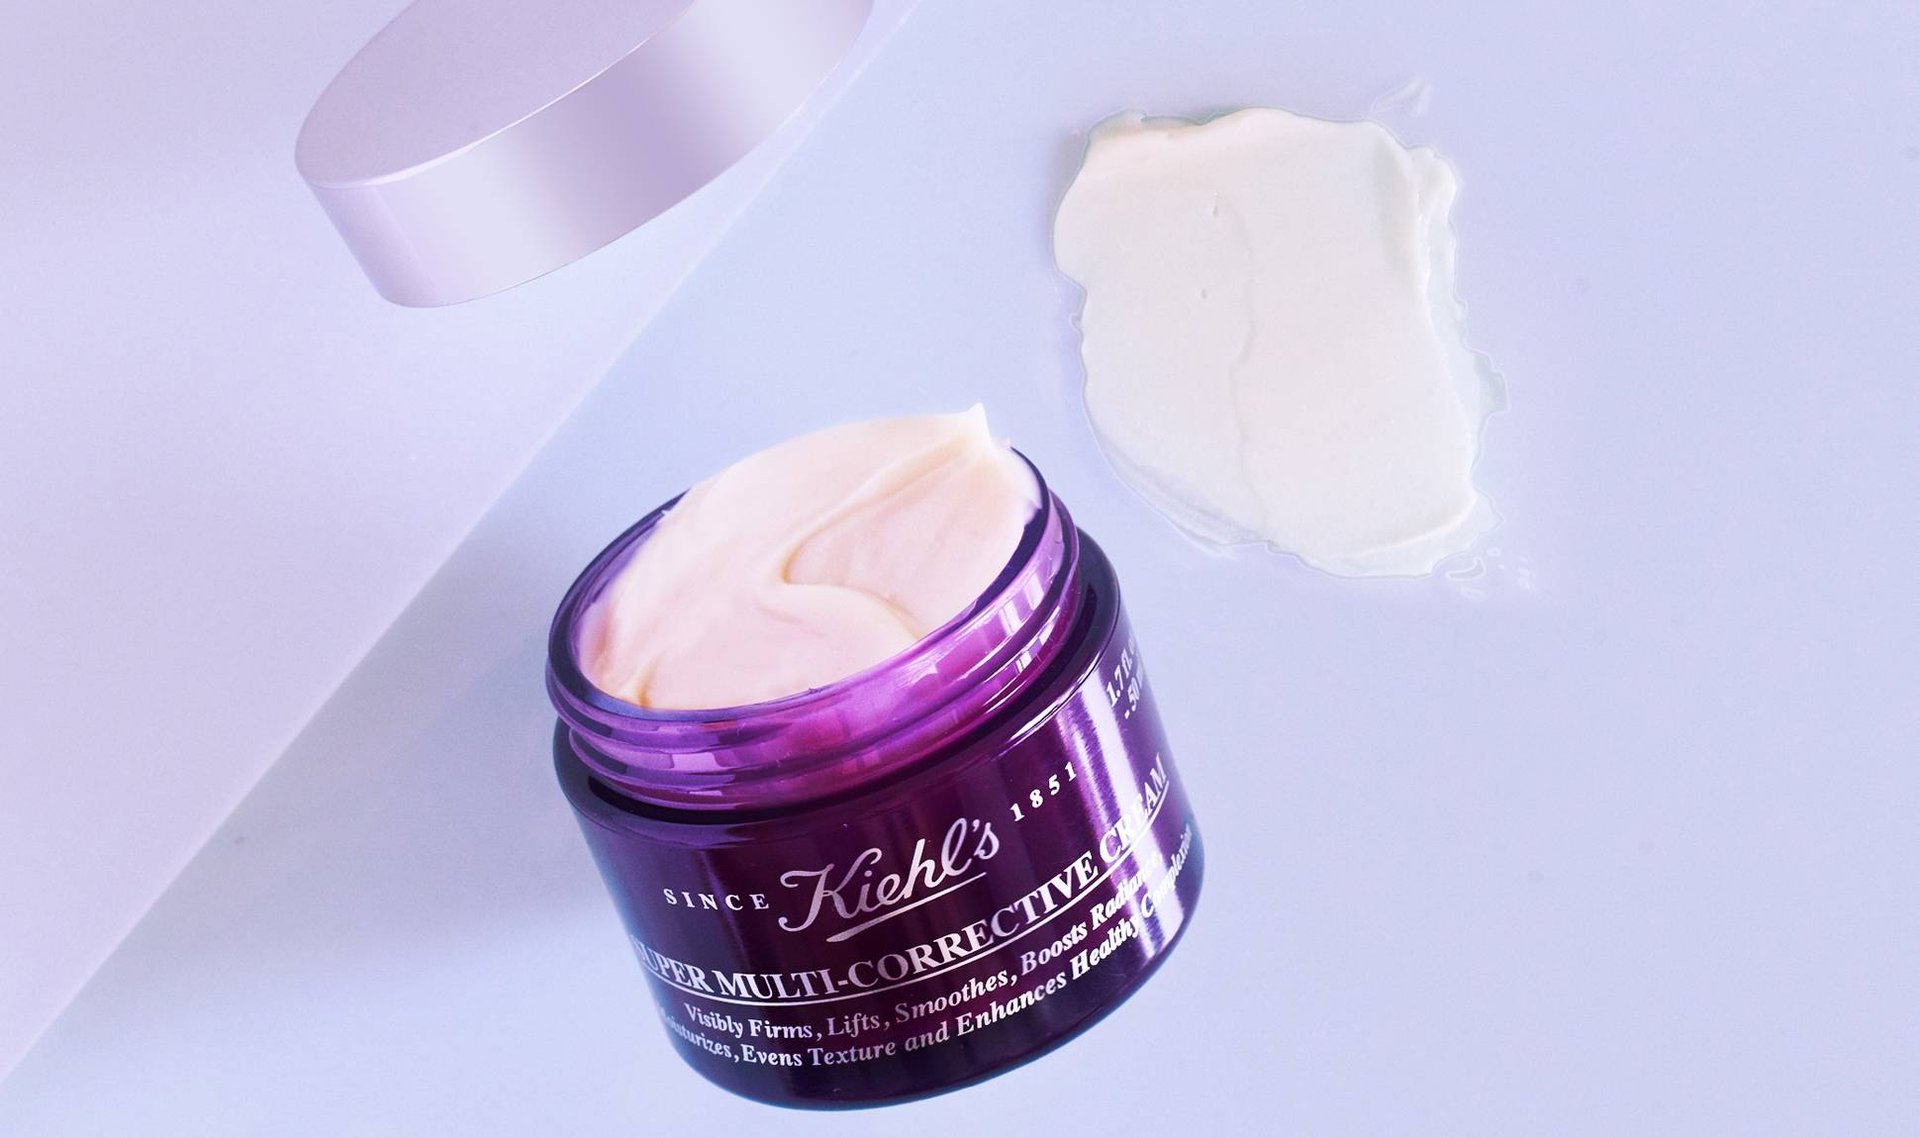 10 Best-Selling Products to Shop From Kiehl’s